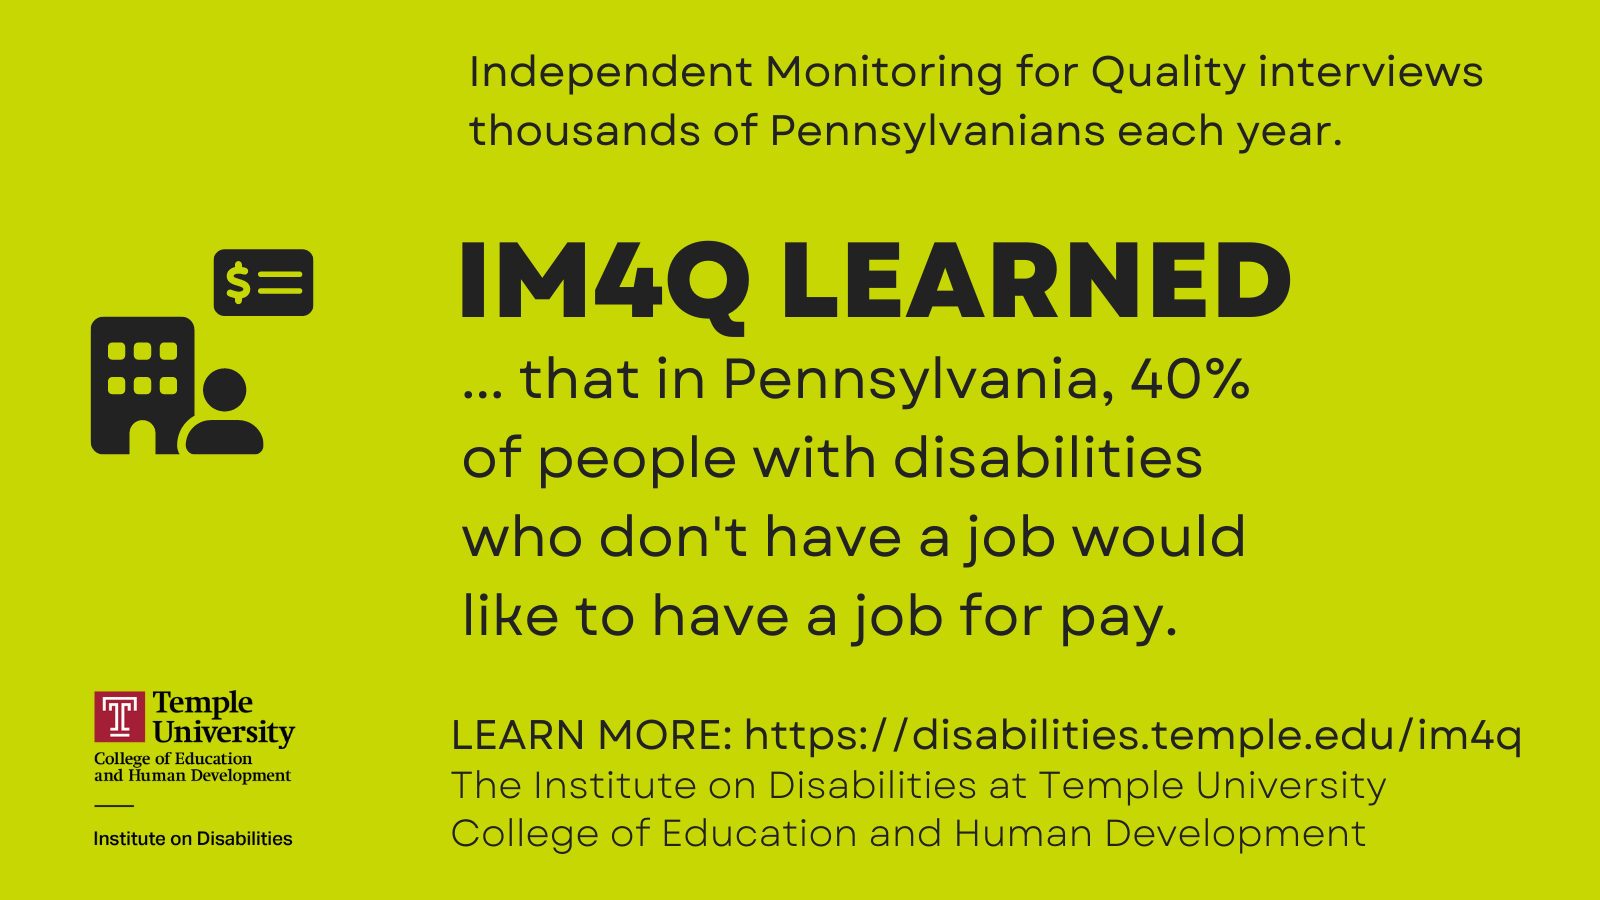 In PA, 40% of people with disabilities who don't have a job would like to have a job for pay.